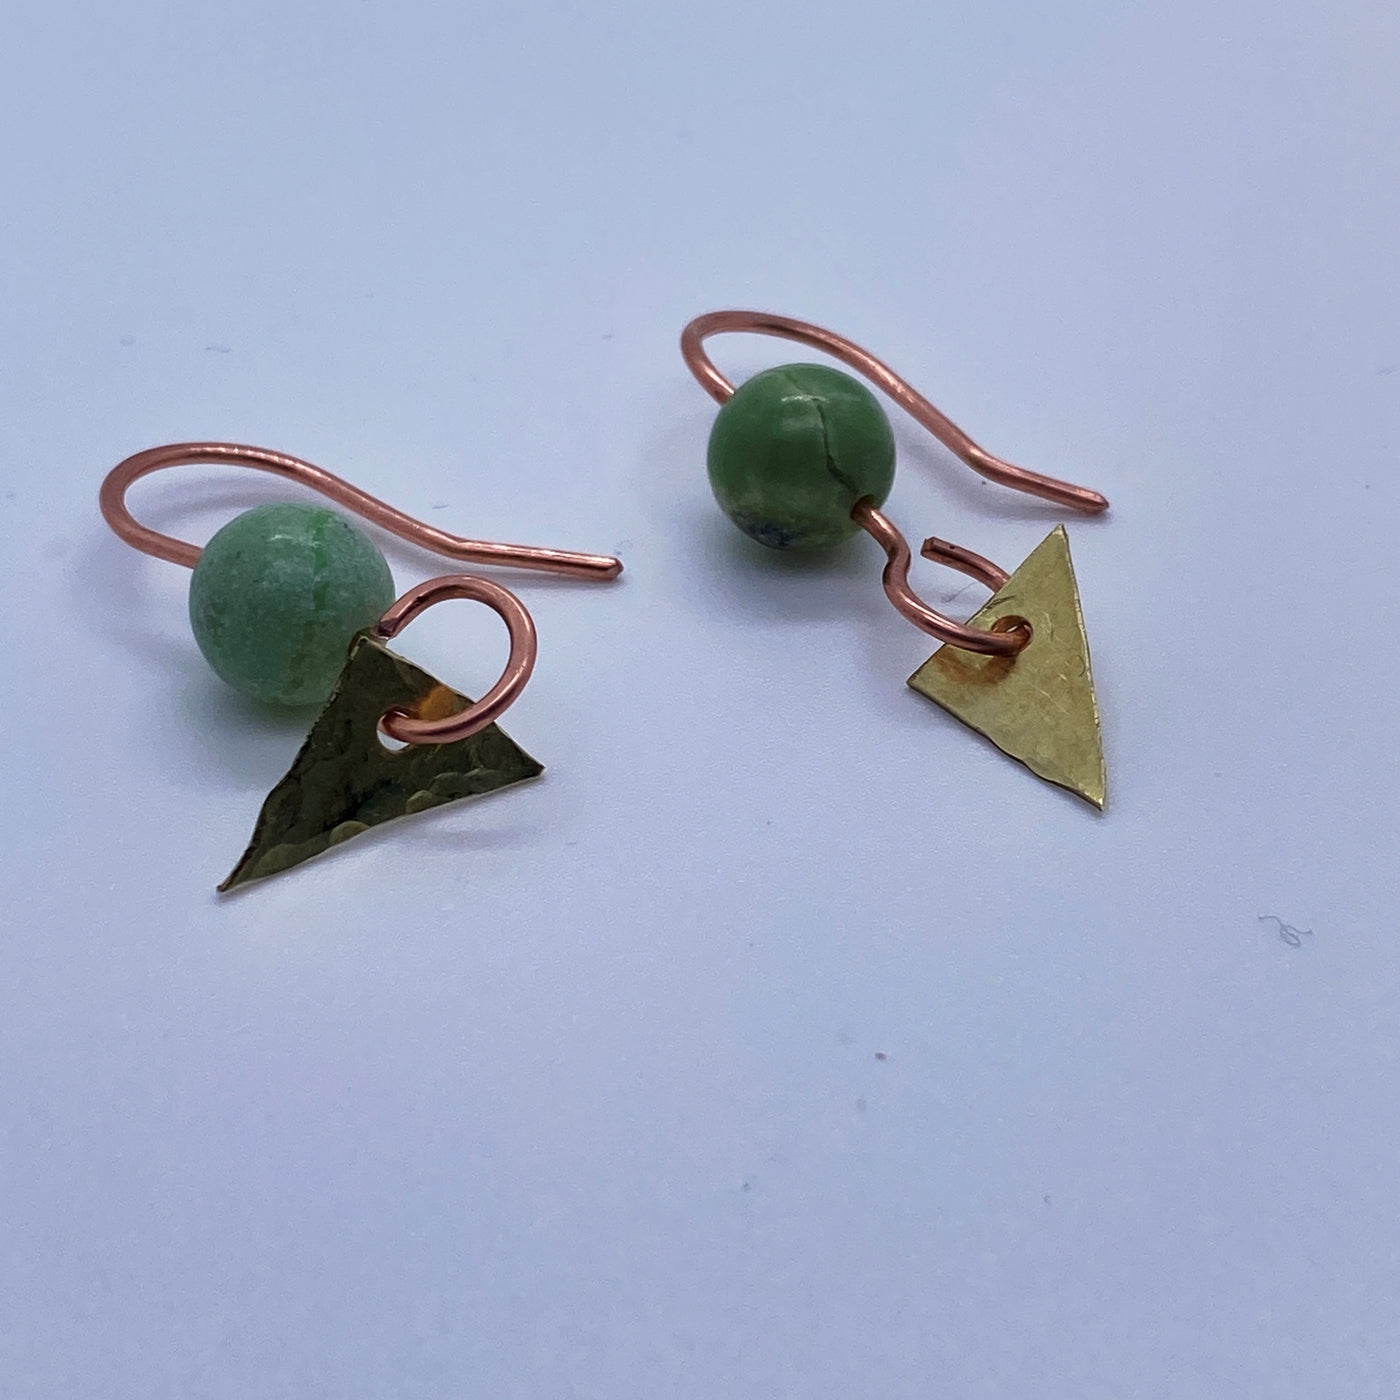 Green tourquoise and brass earrings. Circa 3 cm long